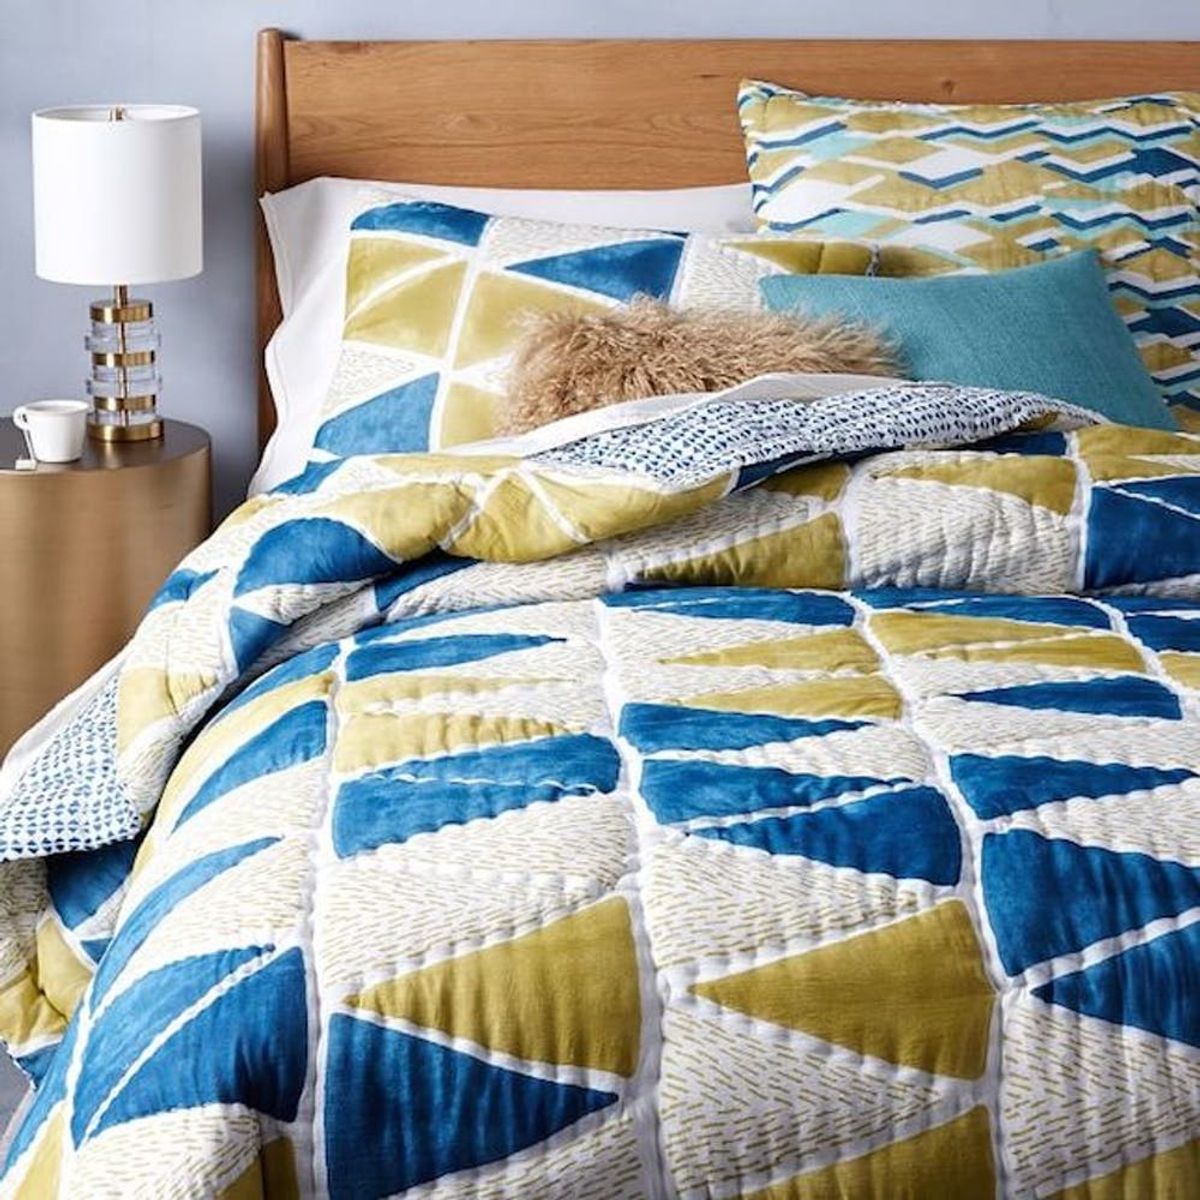 12 Modern + Colorful Quilts to Brighten Up Your Bedroom for Spring